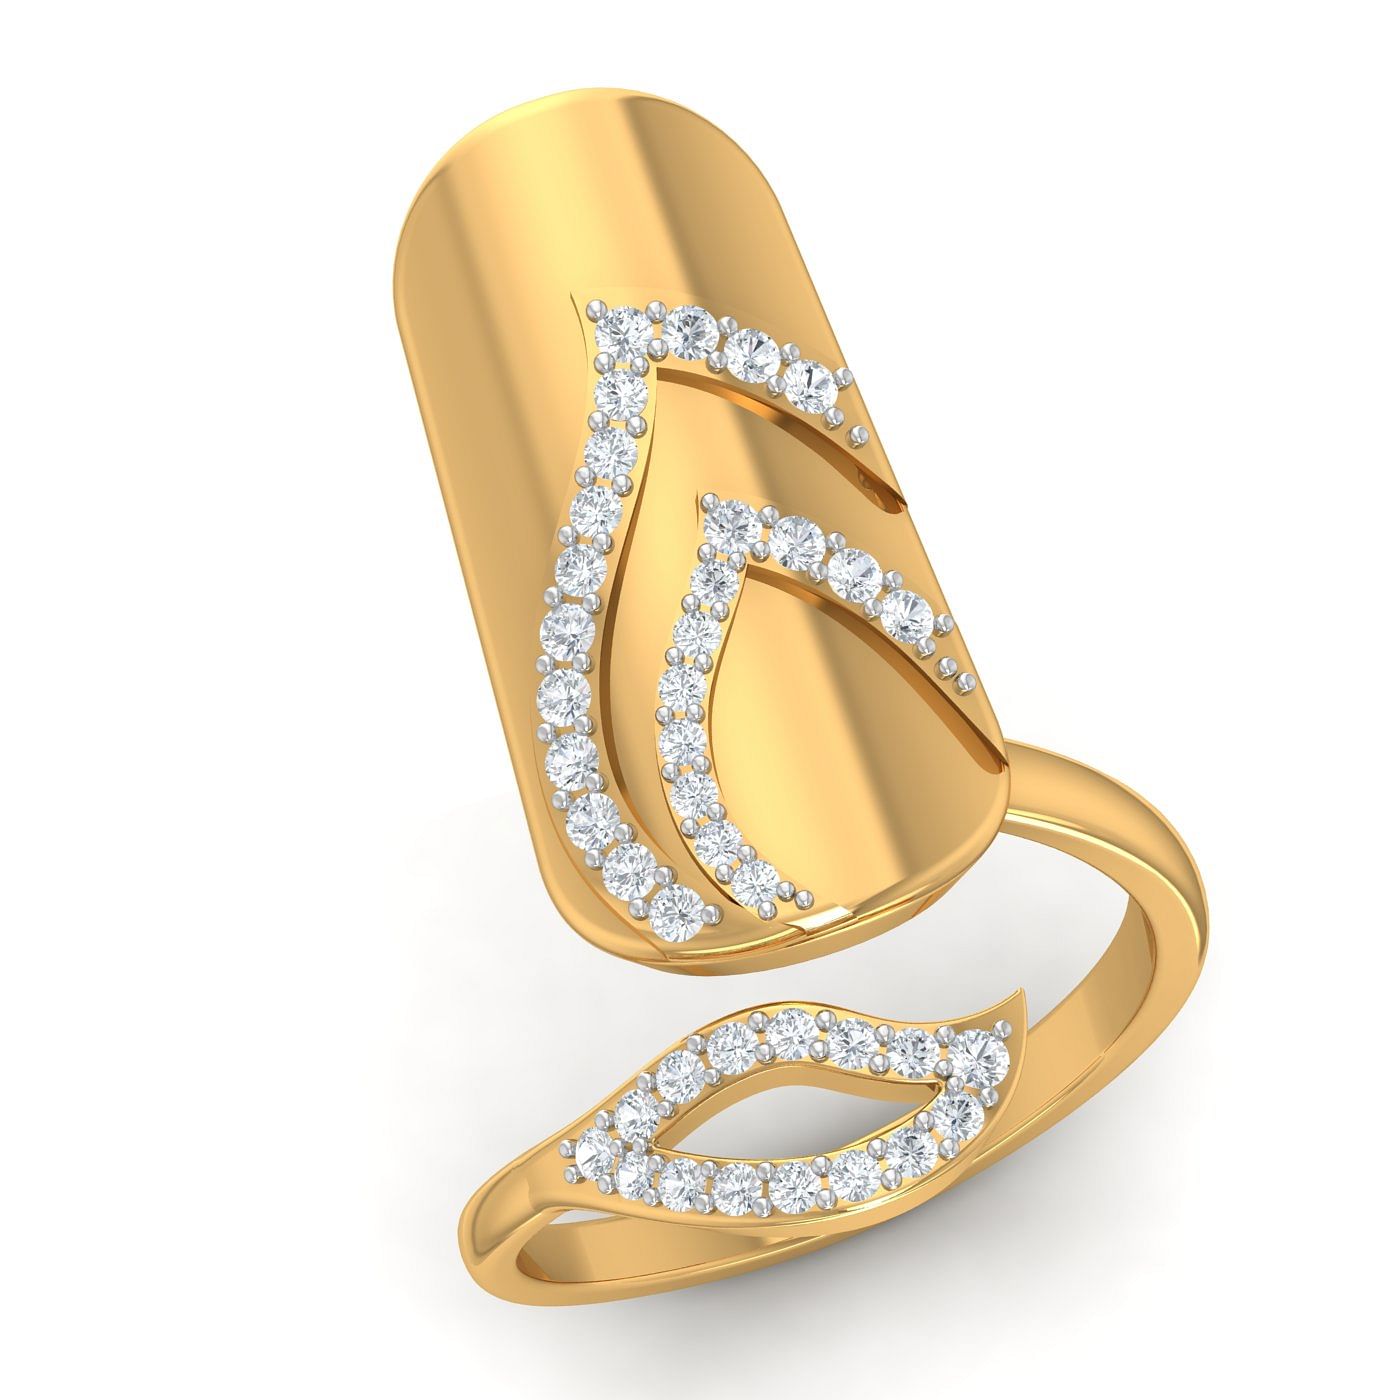 Gold design ring | 9 stunning gold ring designs for women | Times Now